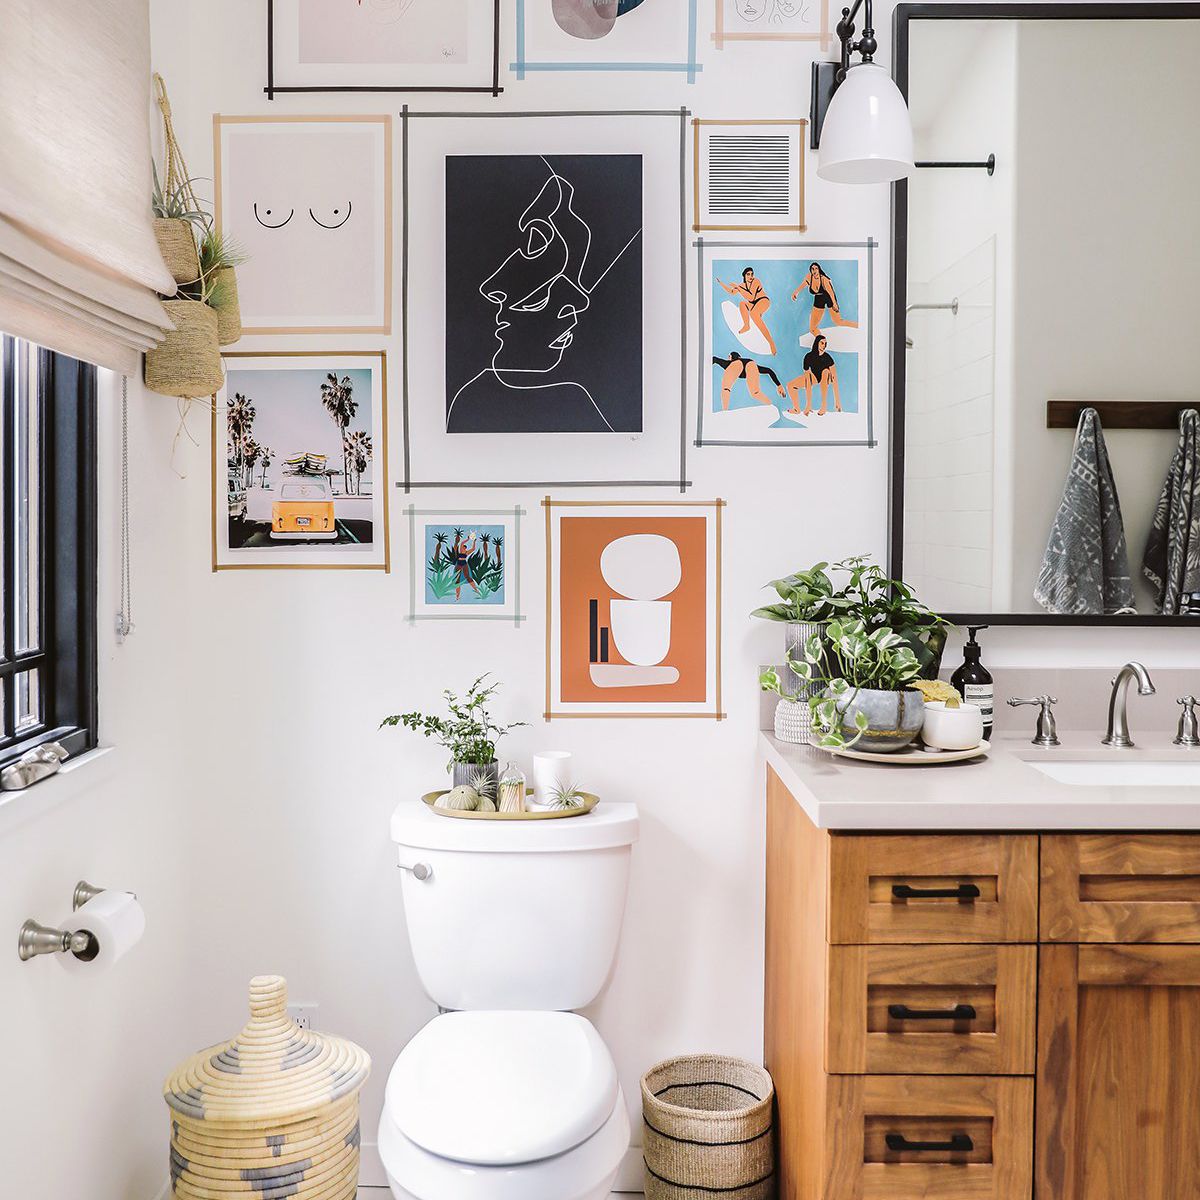 Give Magnificent Wall Art in Bathroom Interiors